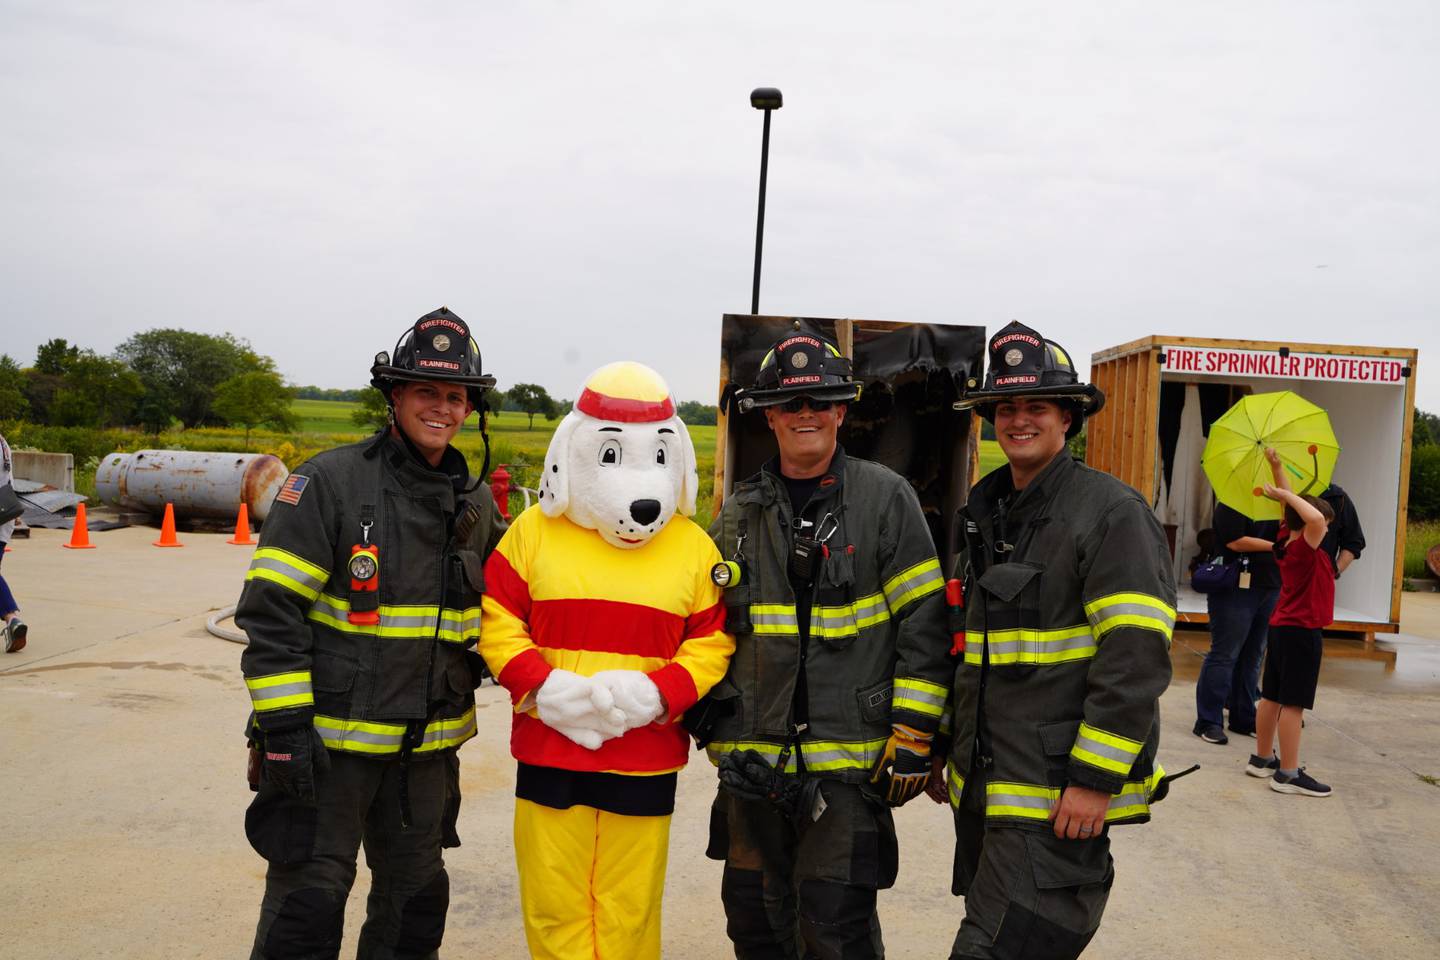 Plainfield firefighters pose with Sparky the mascot at the Plainfield Fire Protection District open house on Saturday, Sept. 16, 2023.